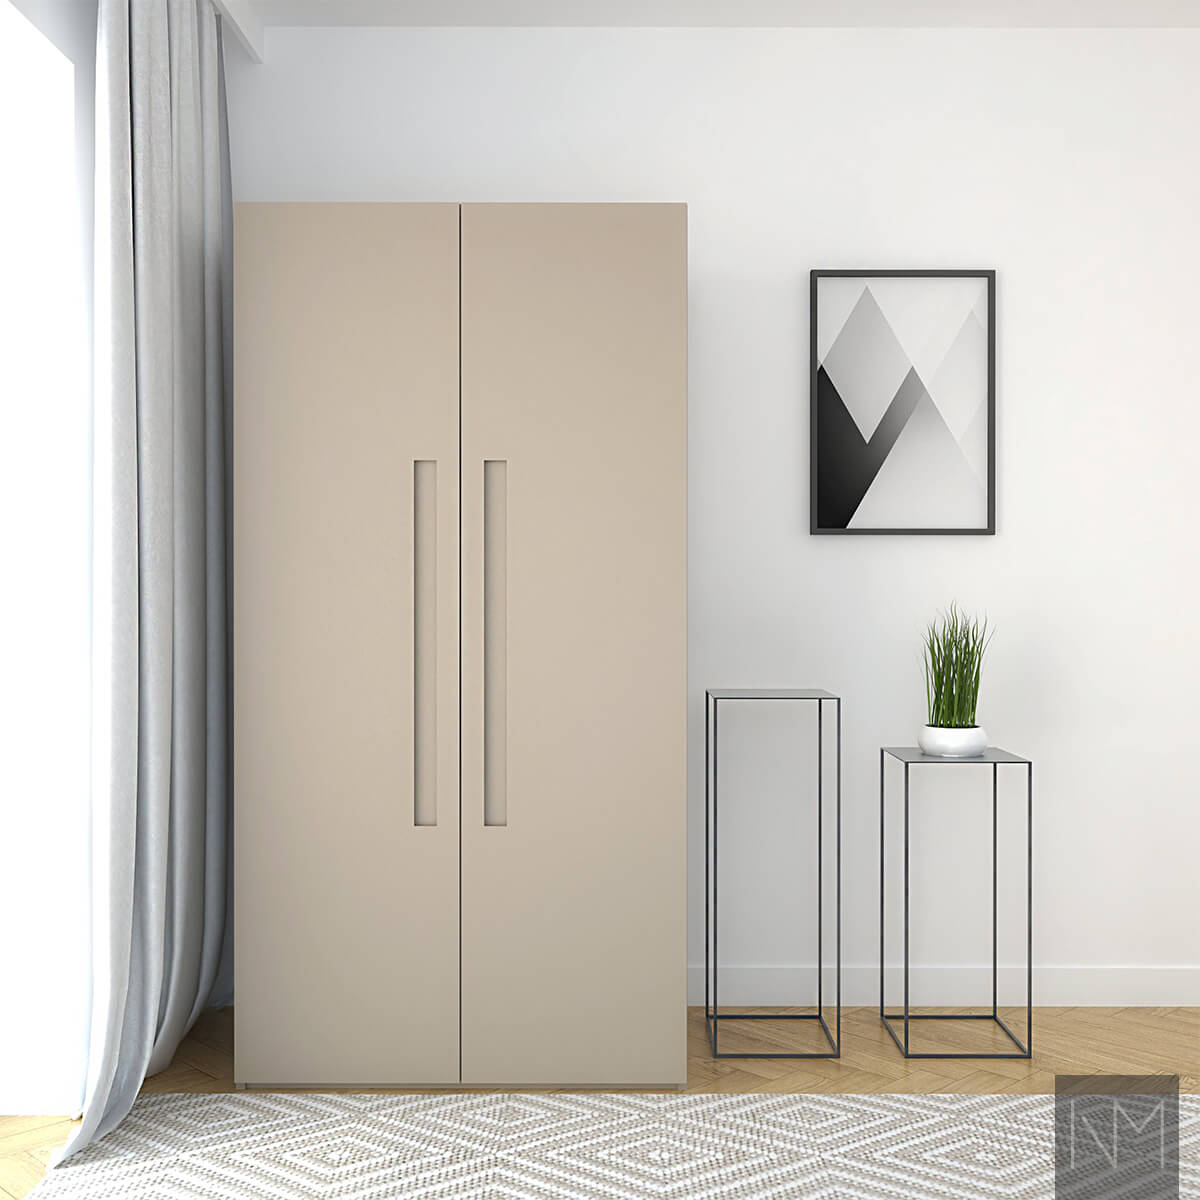 Ontime design. Fronts for PAX wardrobe. Colour Jotun Nutmeg 1929 or NCS 4806-Y38R